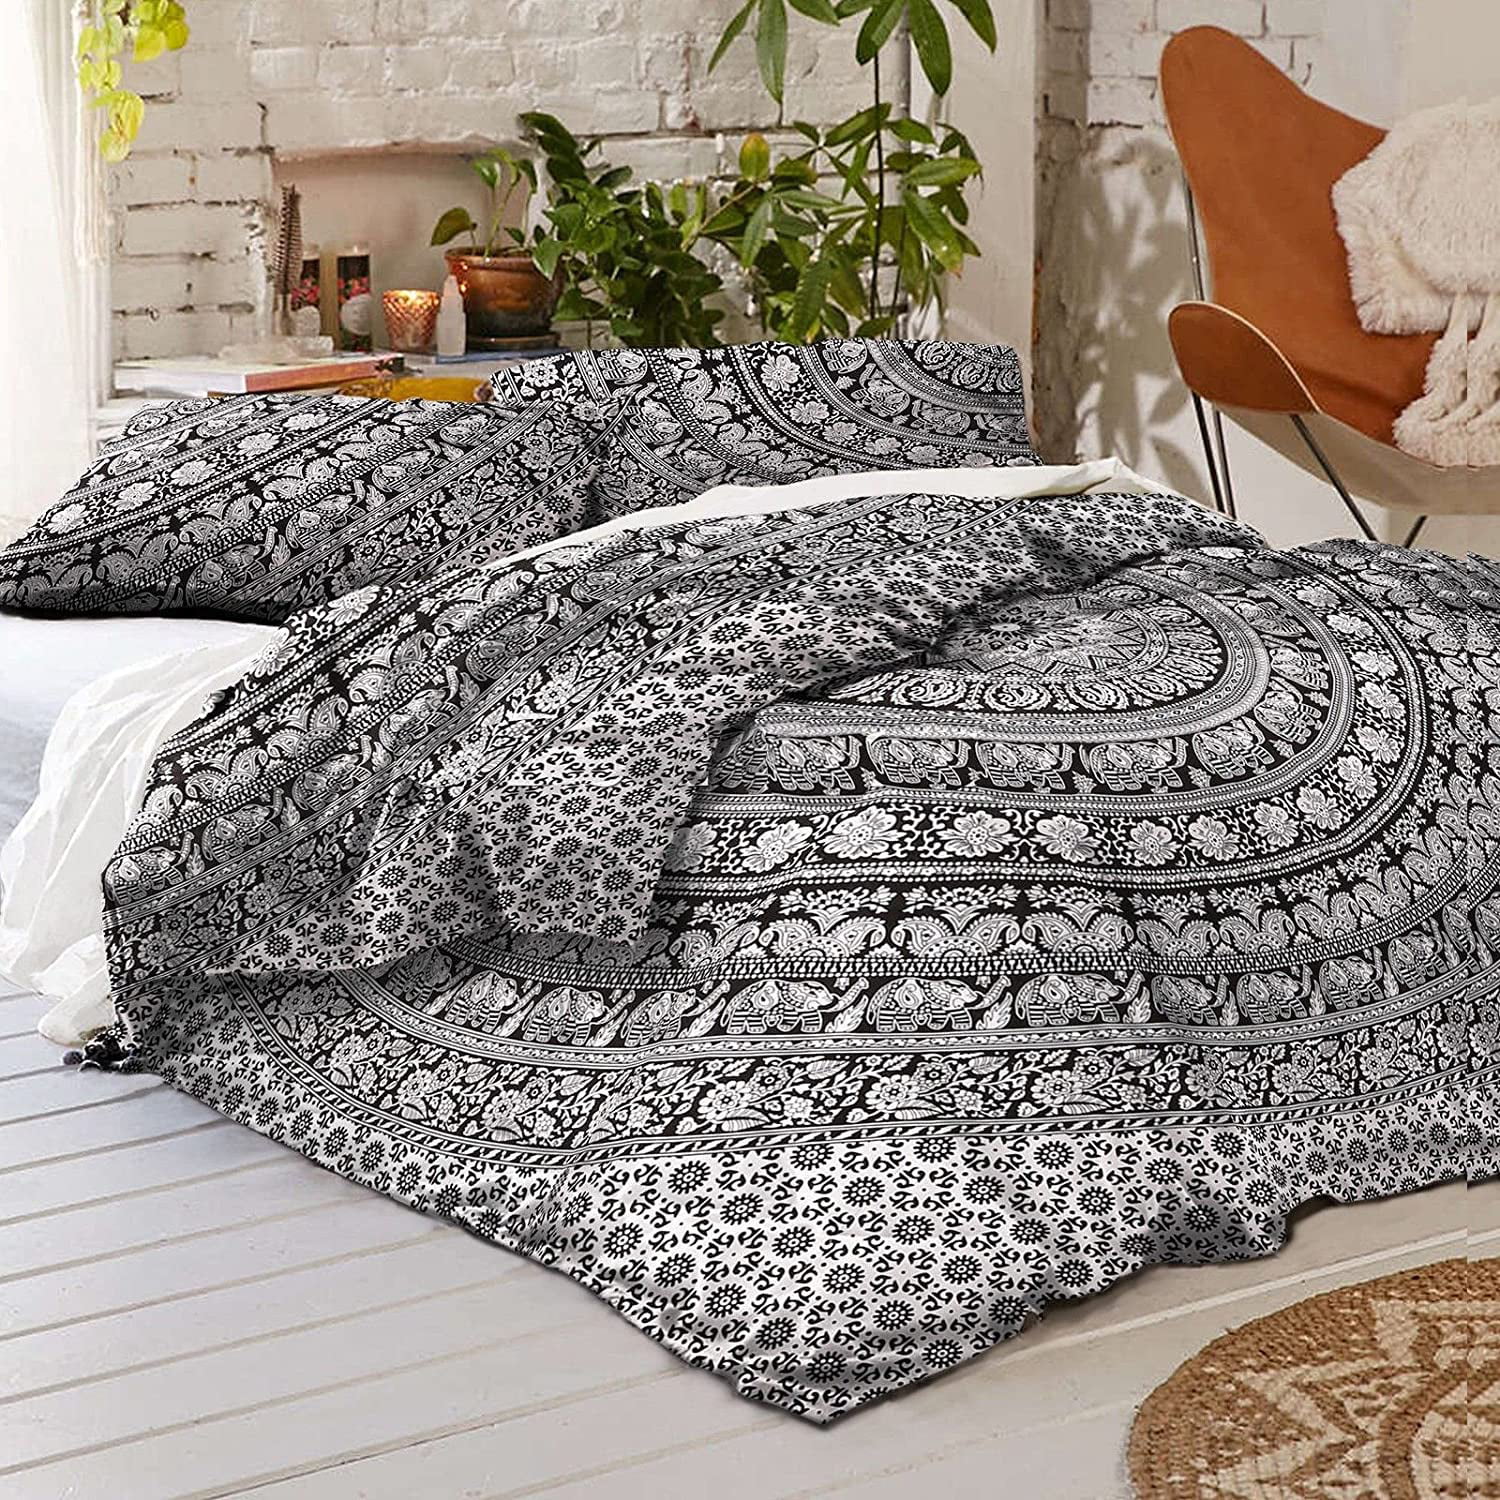 Details about   100%Cotton Indian Kantha Handmade Twin-Quilt Vintage Bedspreads Blanket Throw 